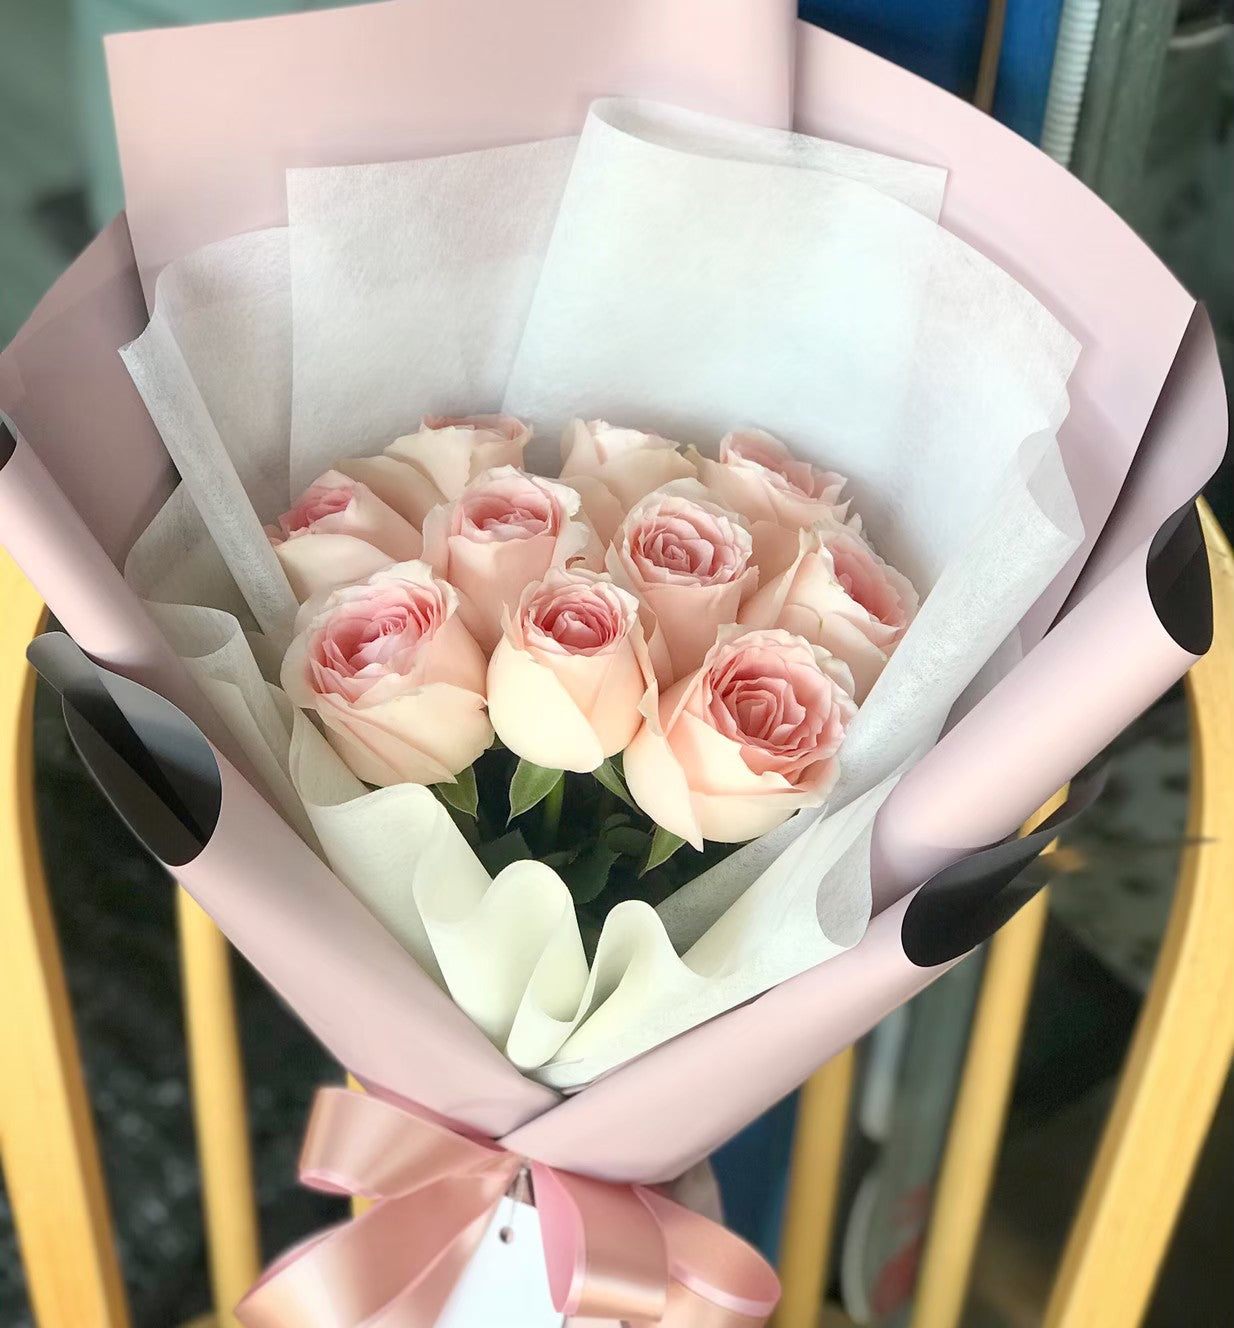 "Pink Love" Stylish Bouquet Of Light Pink Roses